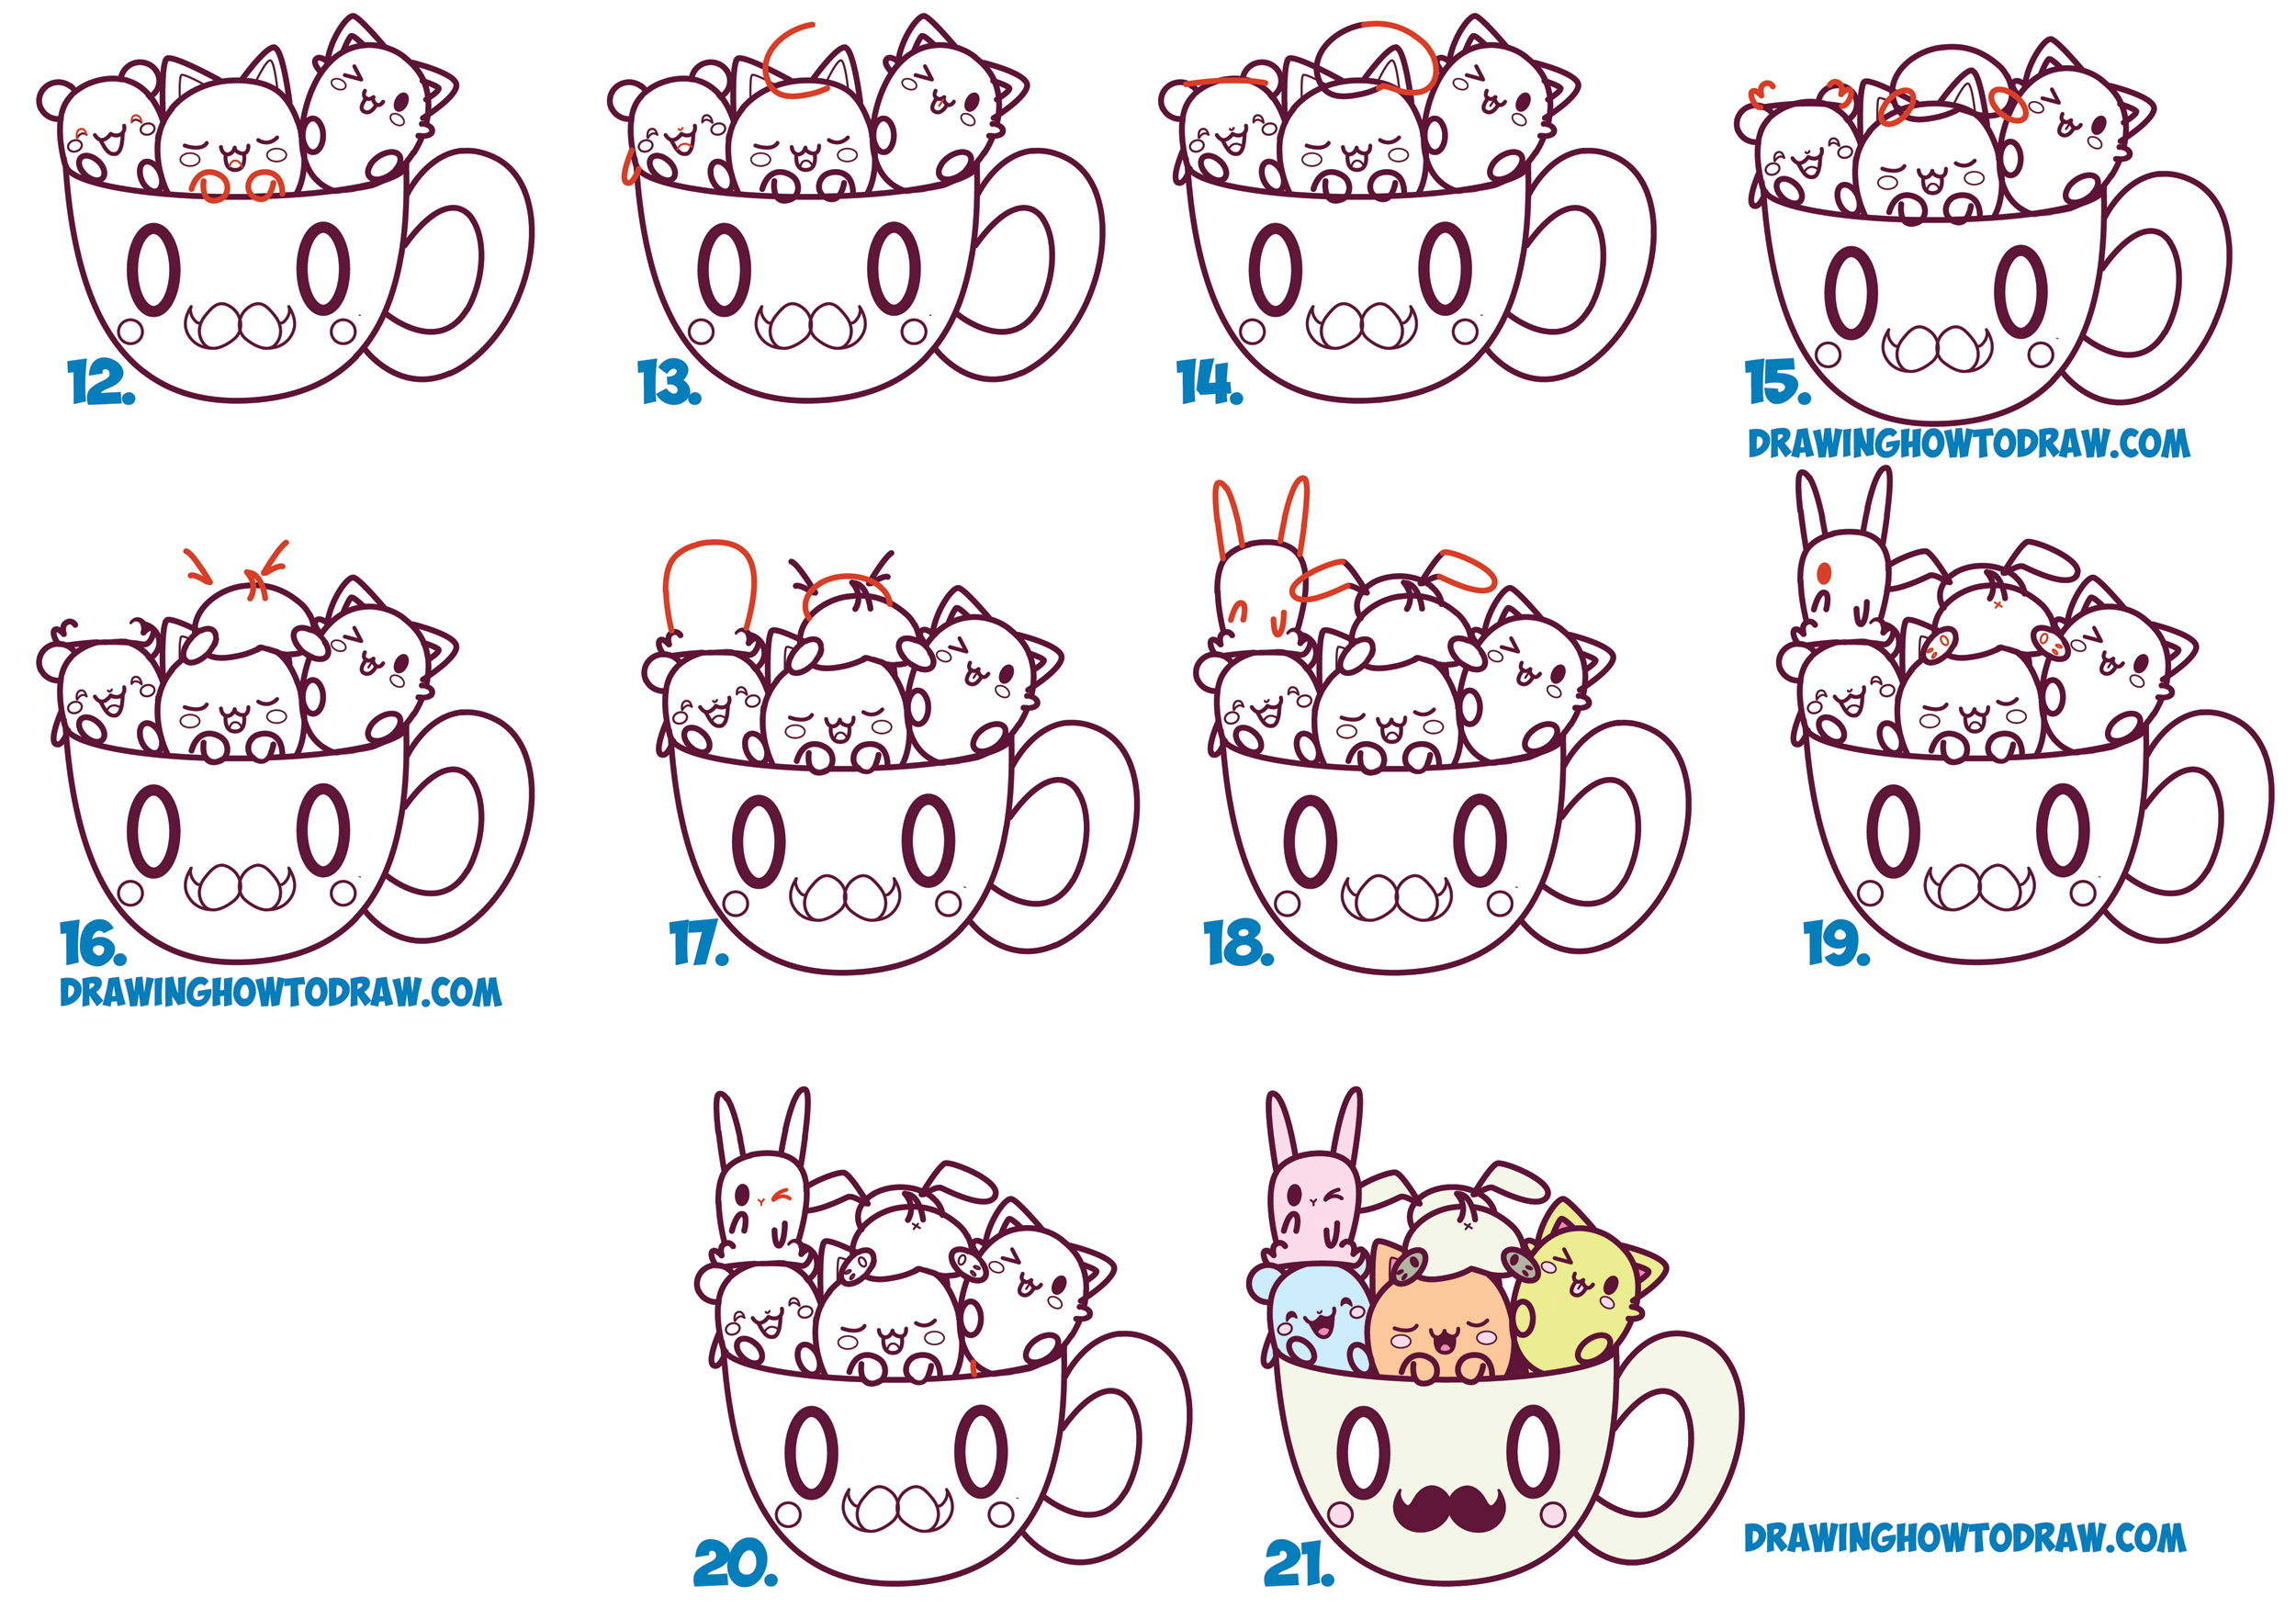 How to Draw Cute Kawaii Animals and Characters in a Coffee Cup Easy